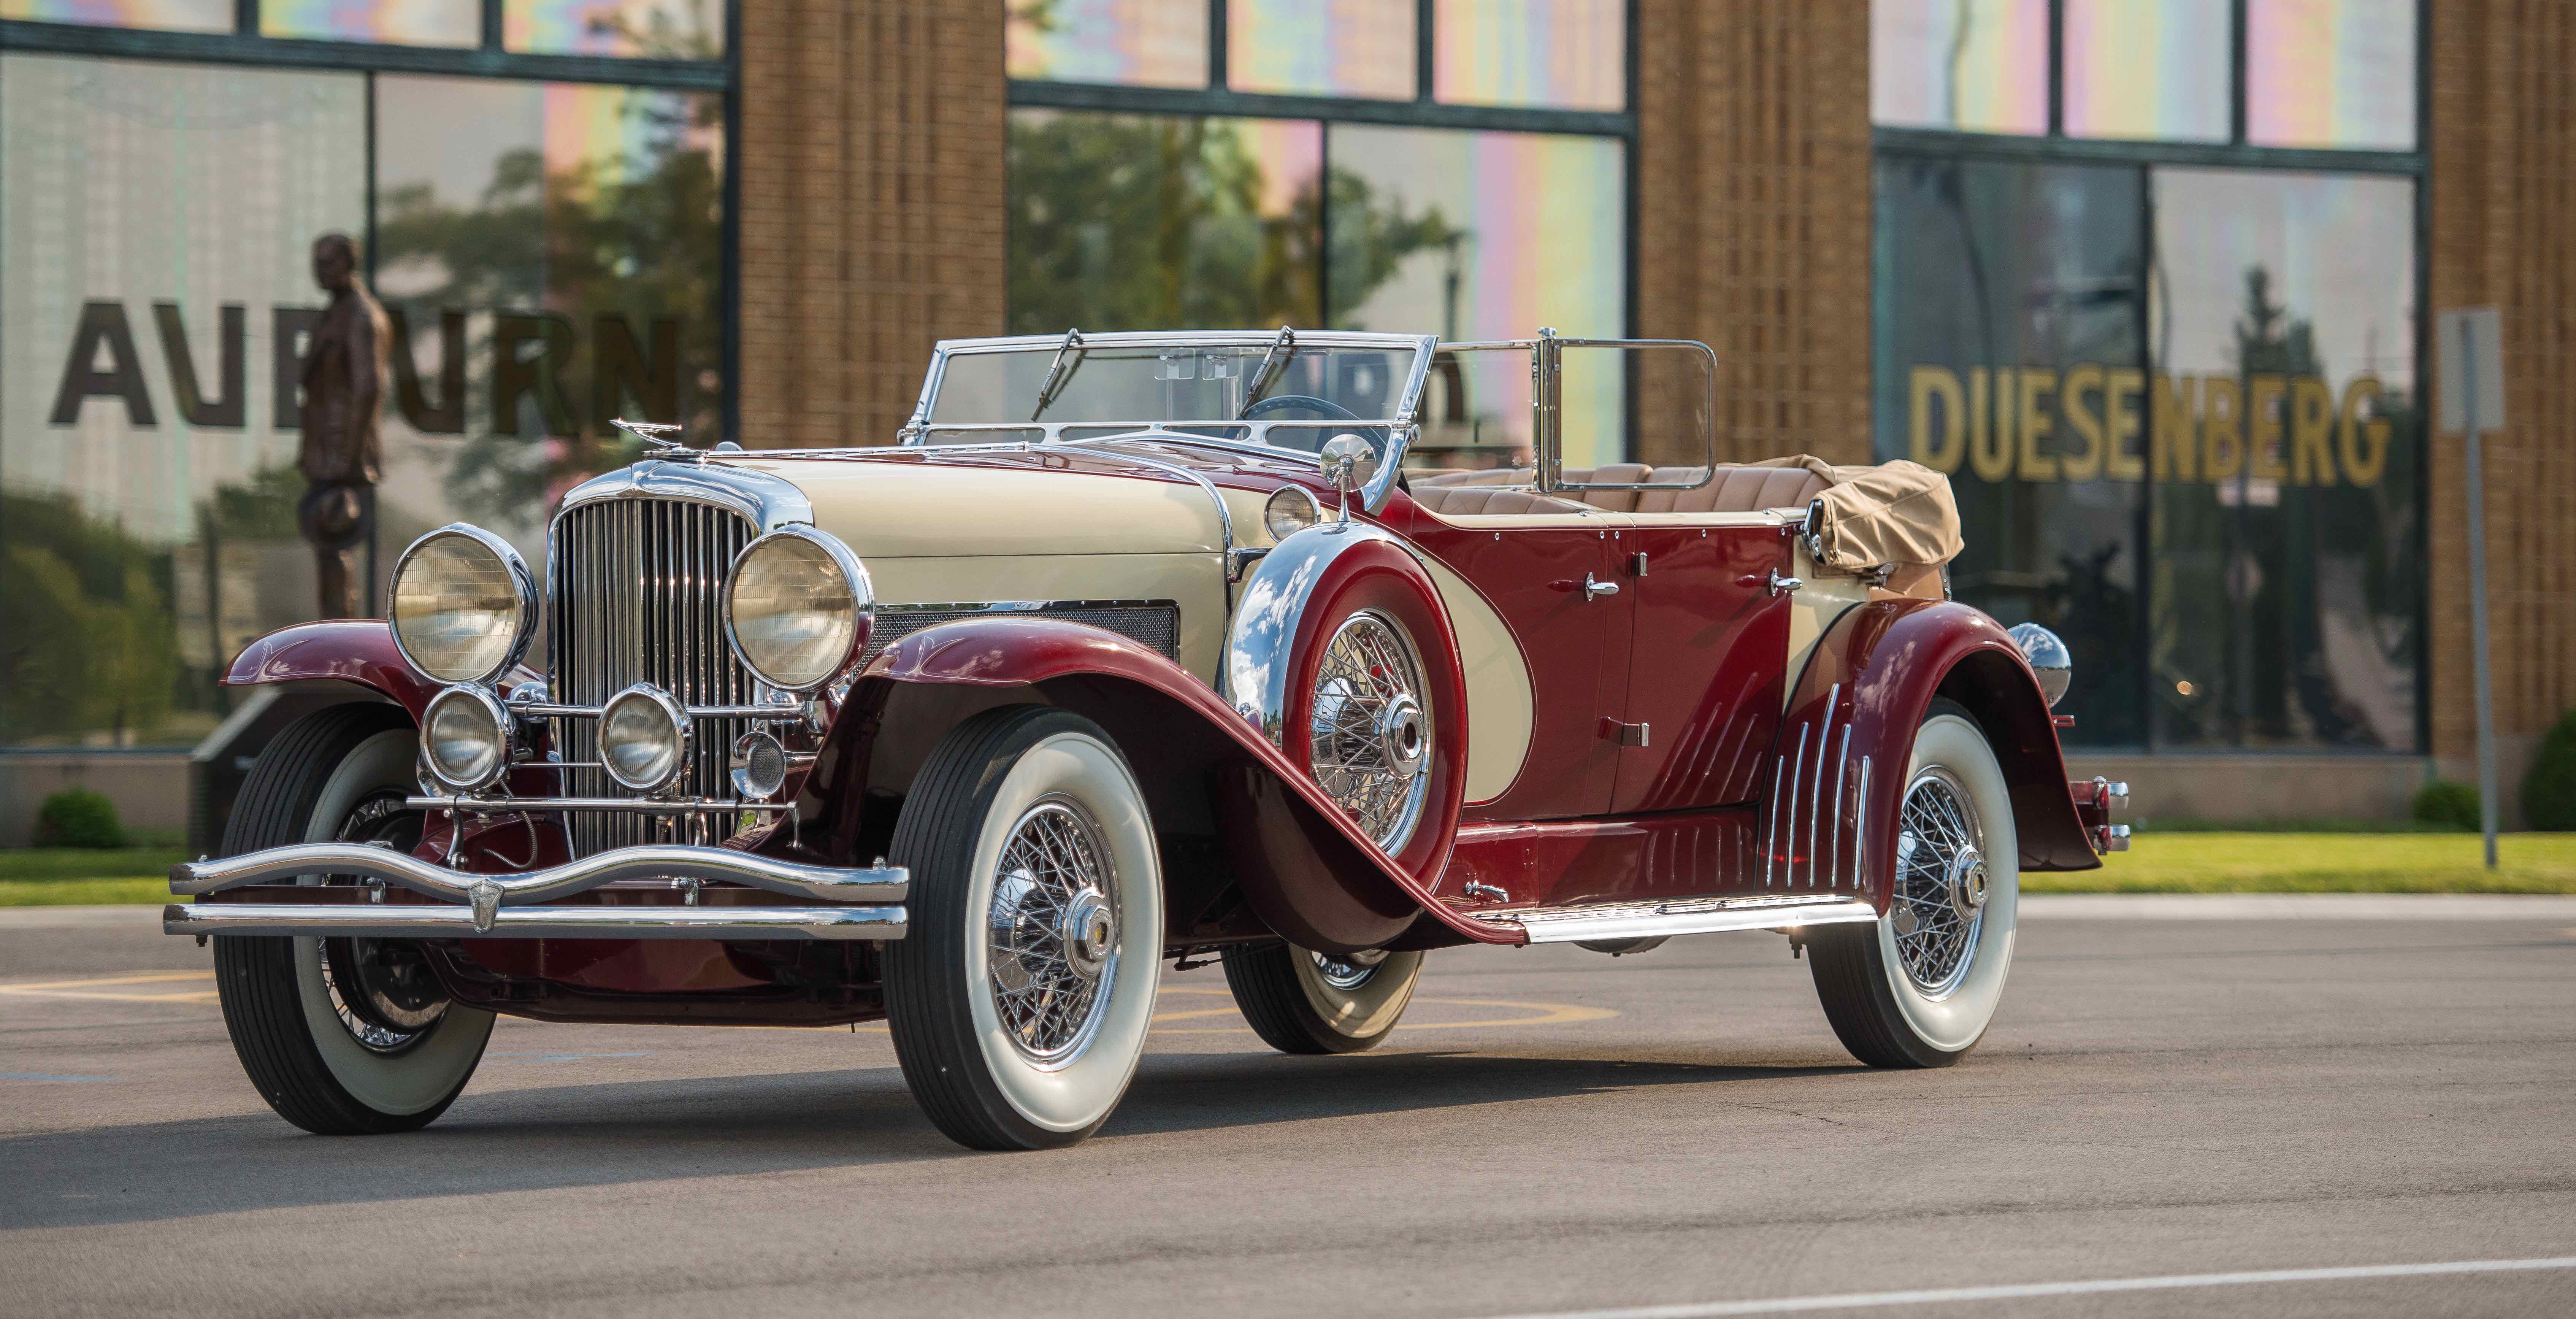 Duesenberg parked in front of the Auburn Cord Duesenberg museum | Auctions America photos by Darin Schnabel